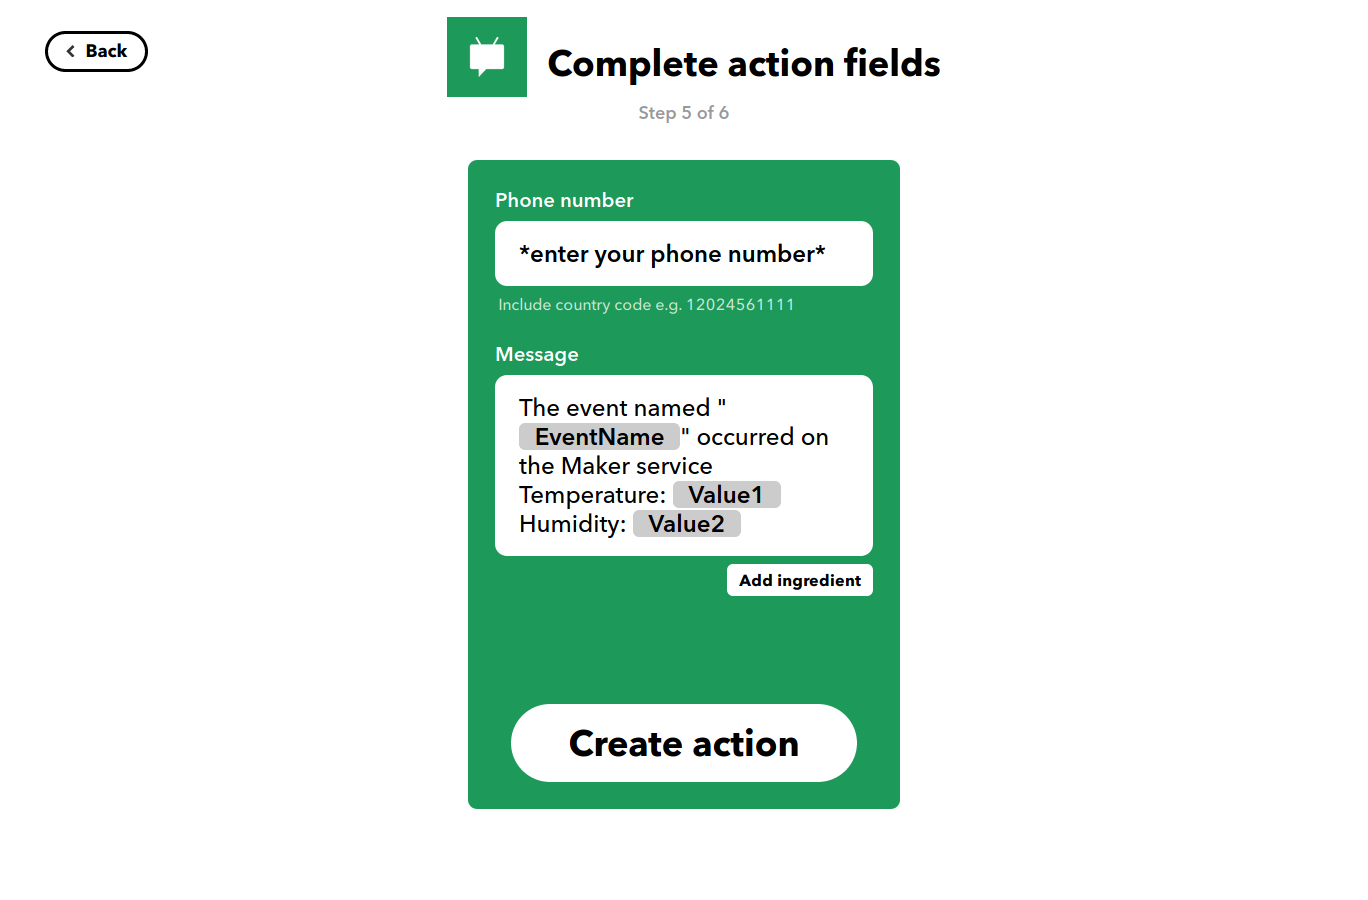 Completing the action fields